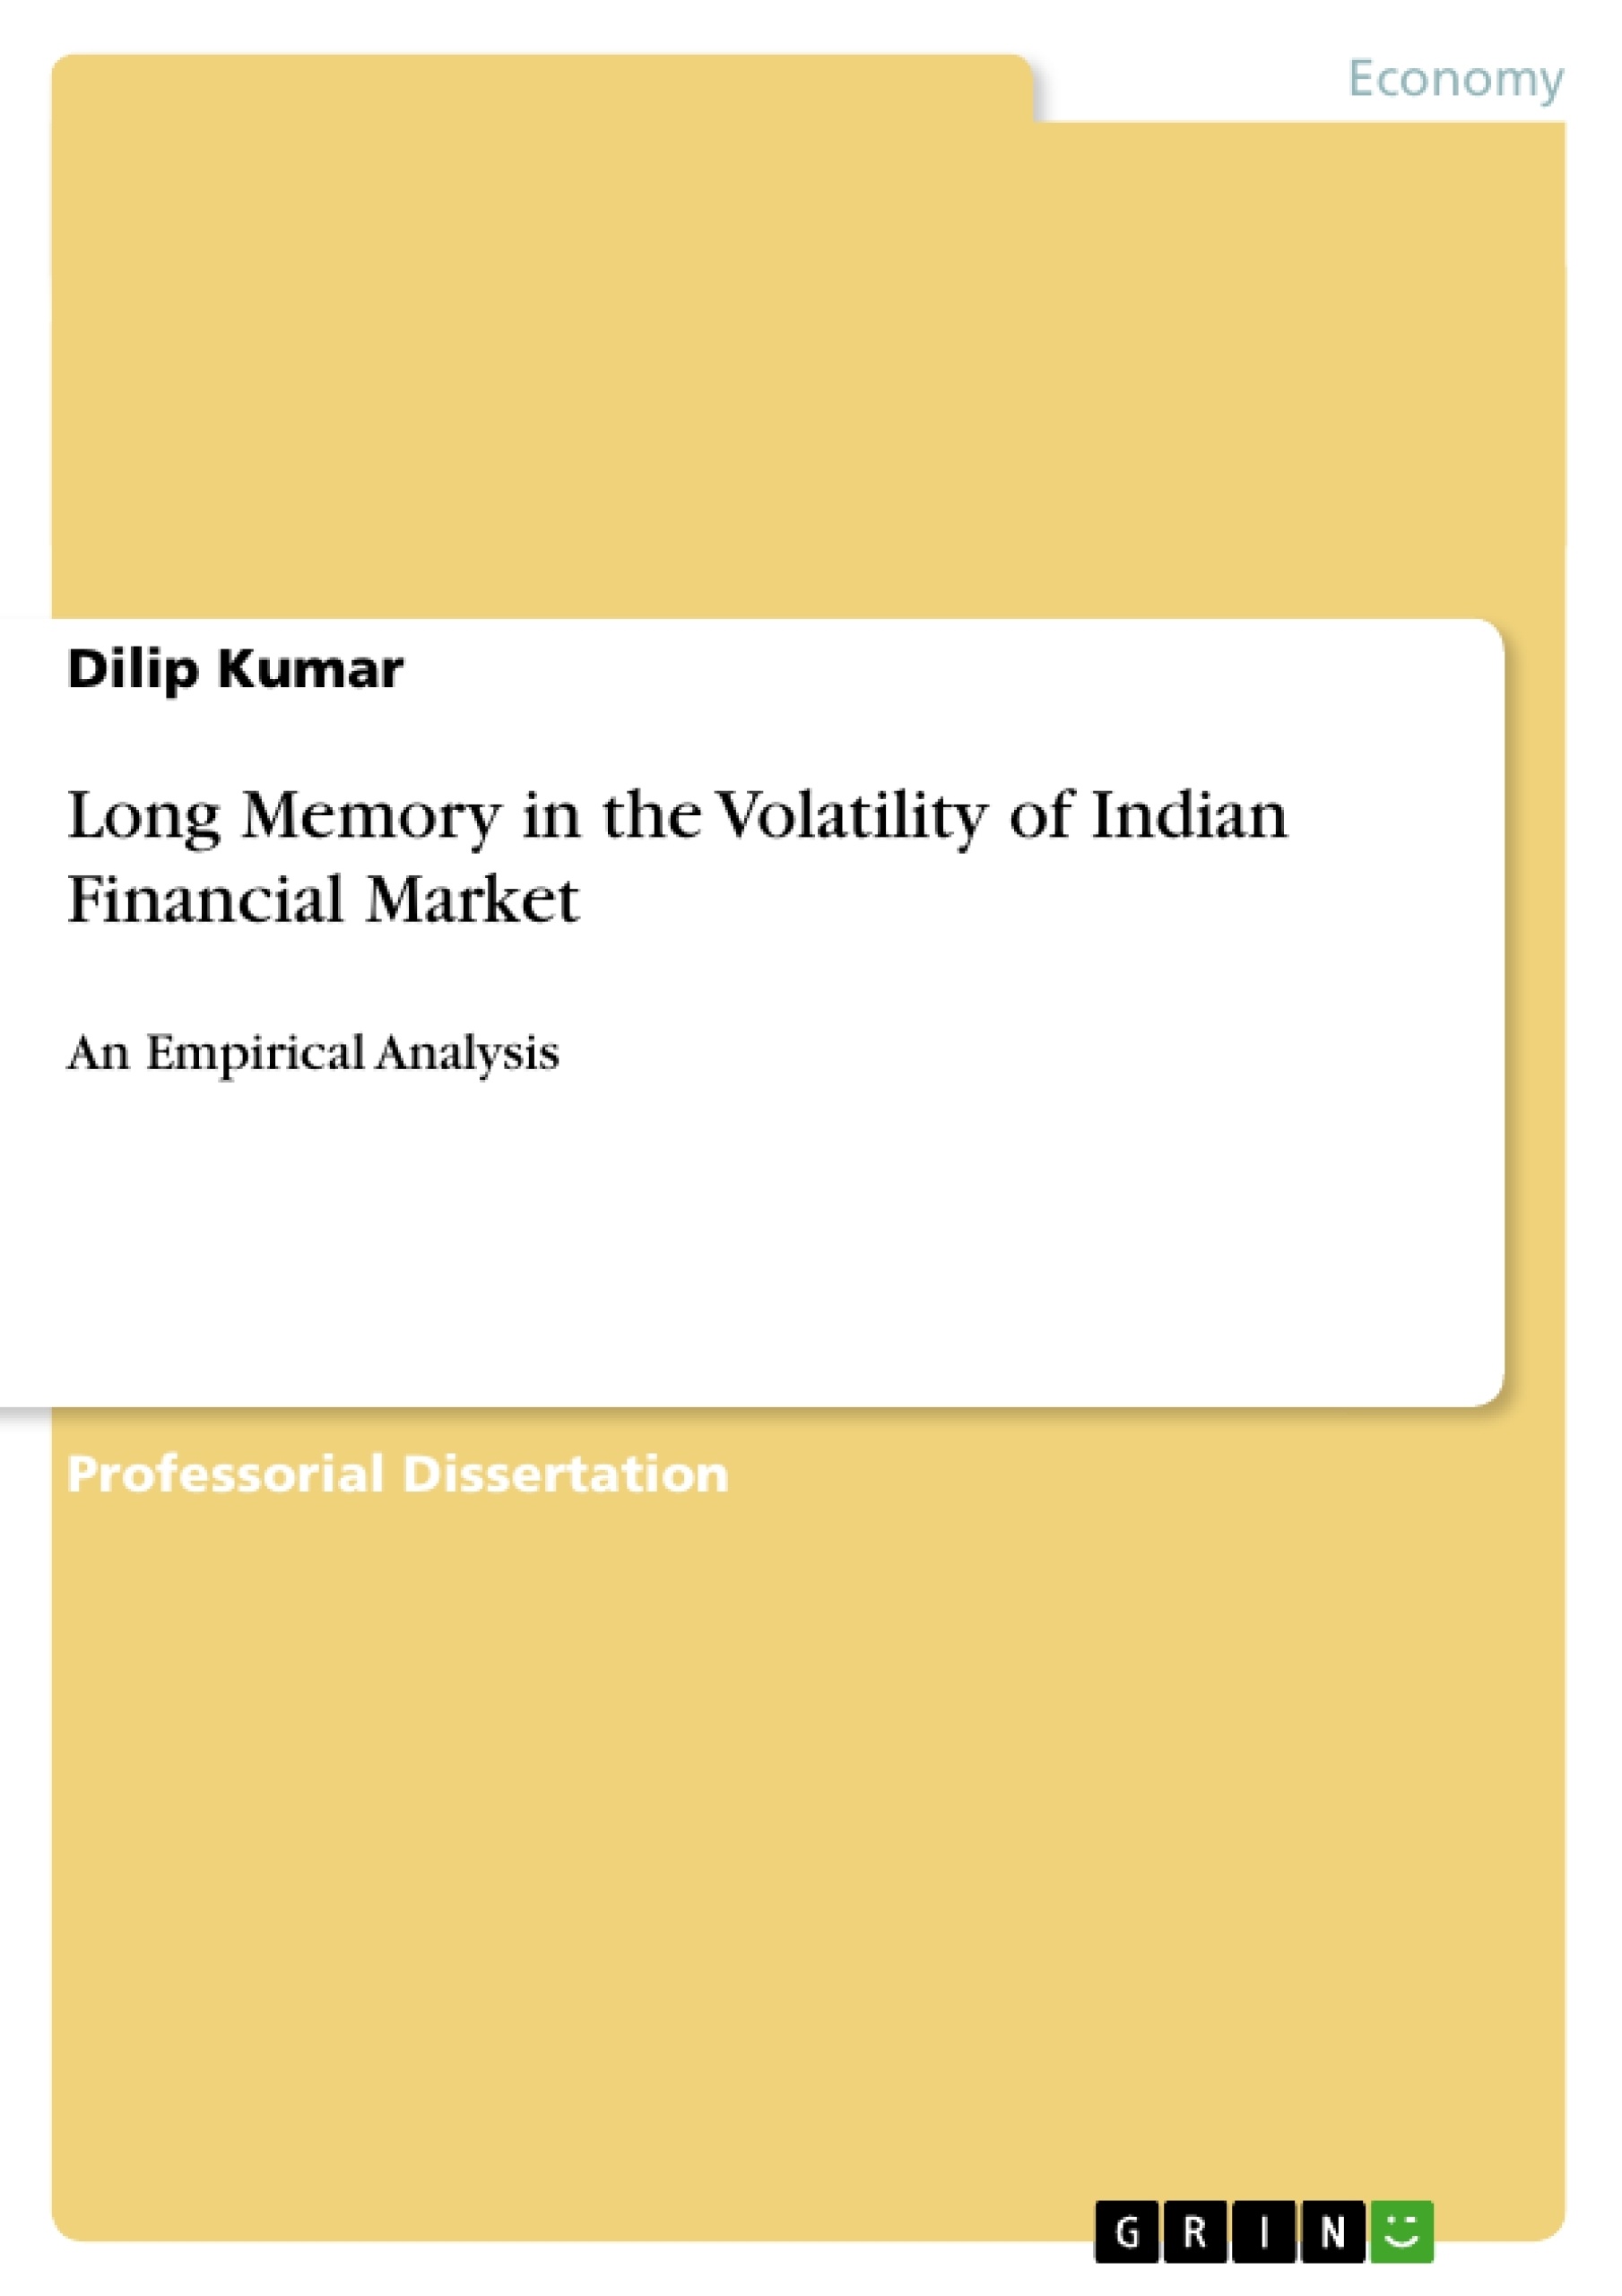 Title: Long Memory in the Volatility of Indian Financial Market